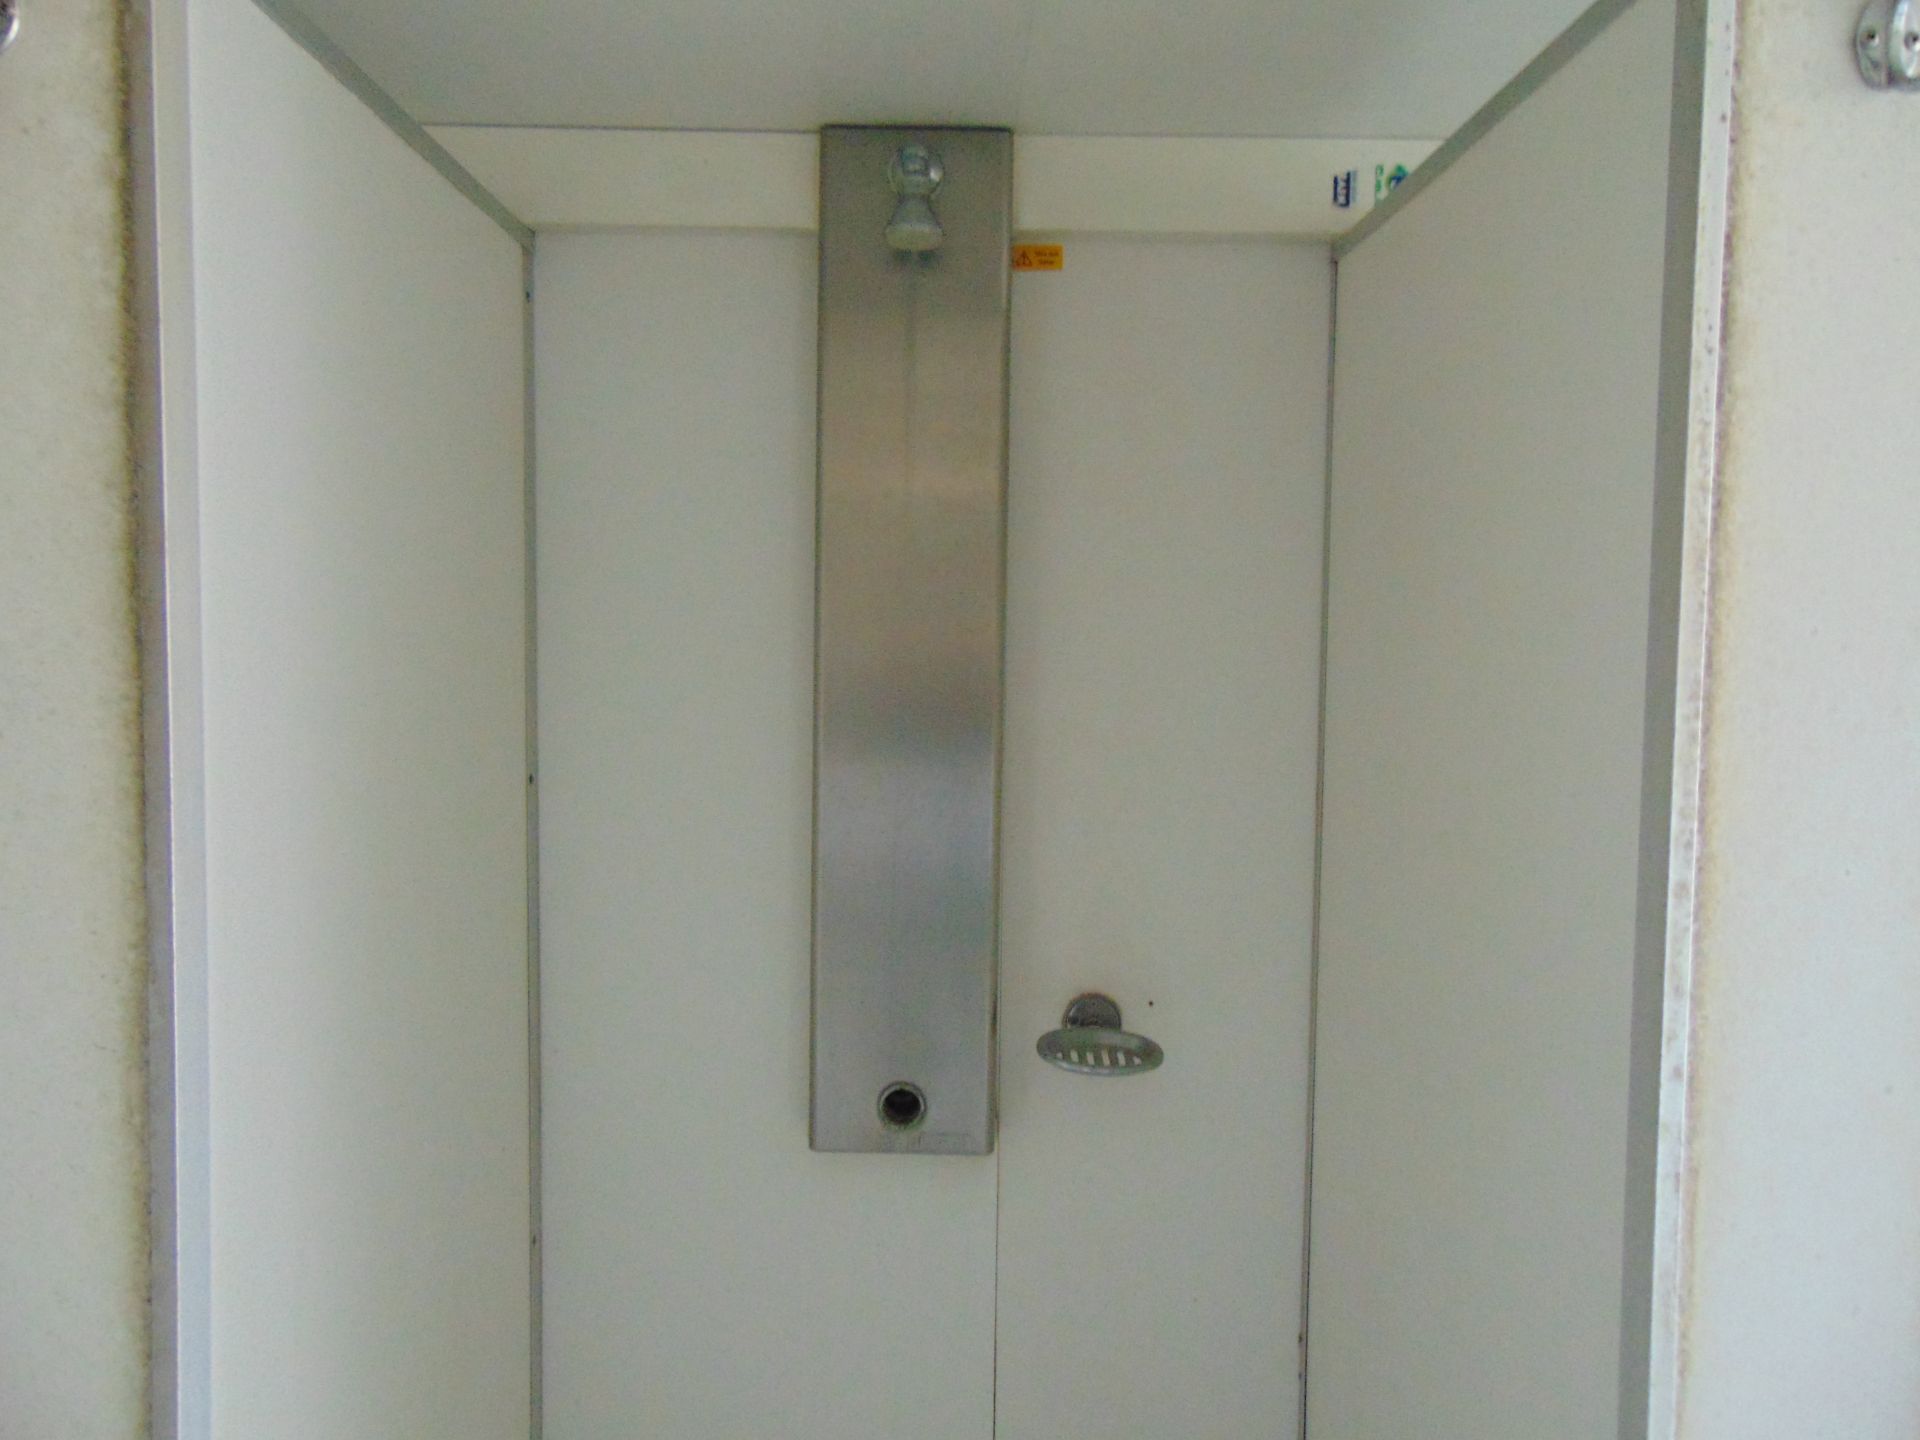 Frontline toilet and shower block units - Image 24 of 29